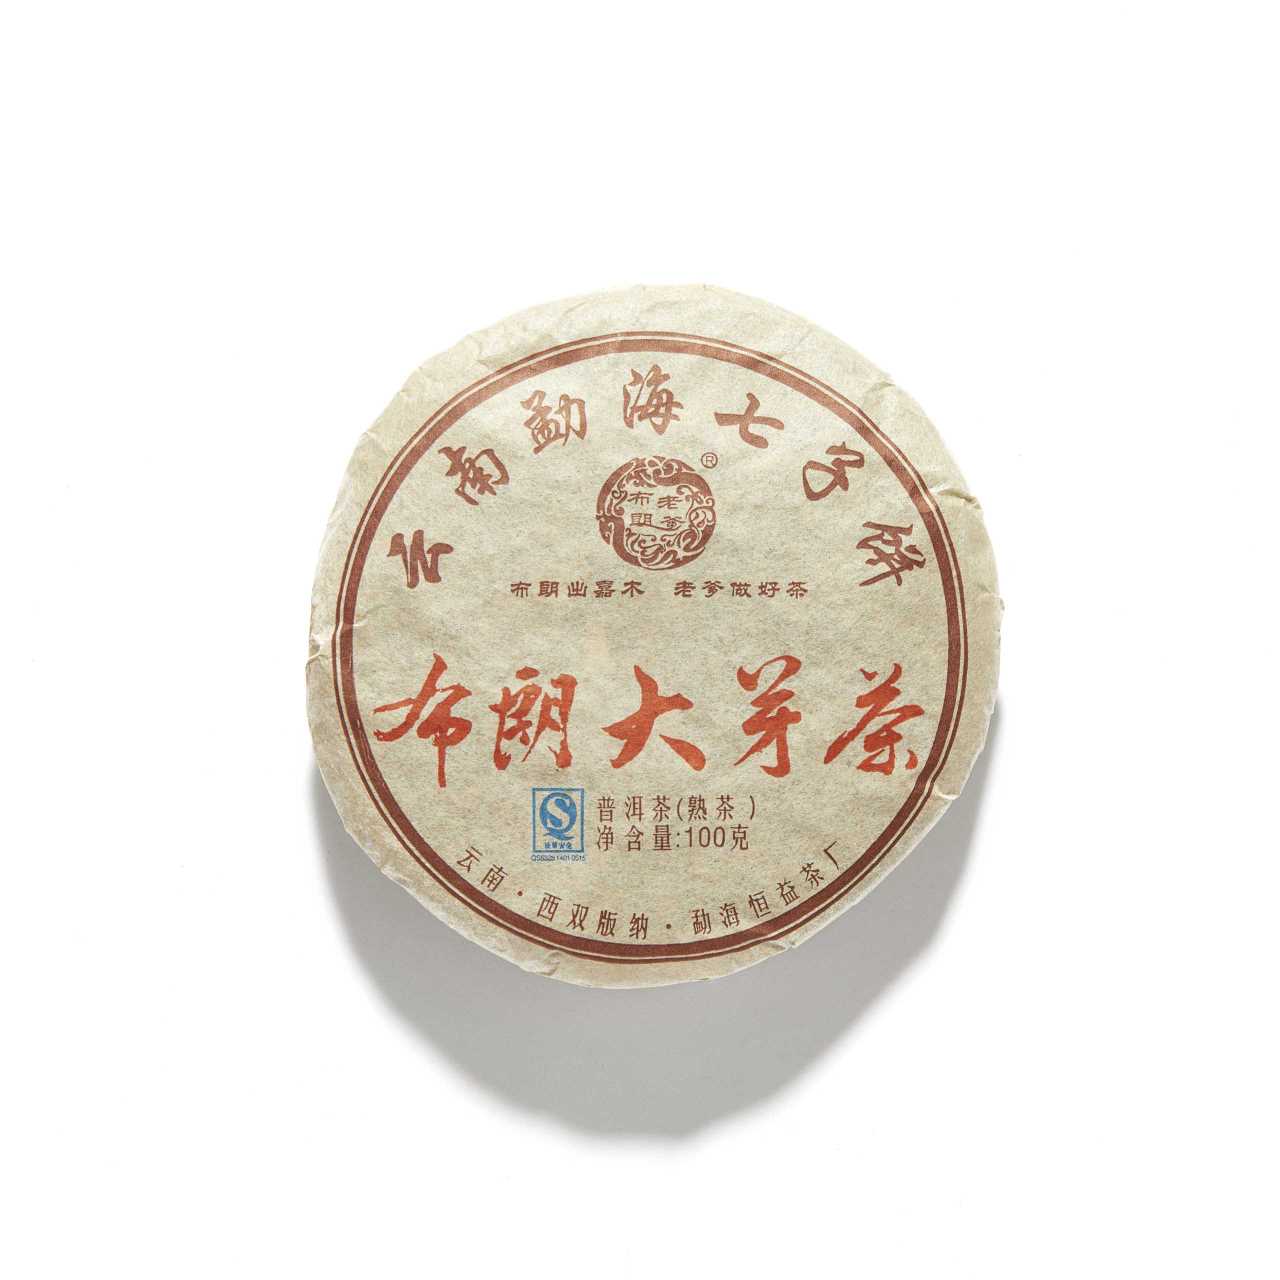 Ripened Cooked Pu-Erh Cake wrapped in a paper with Chinese Letters